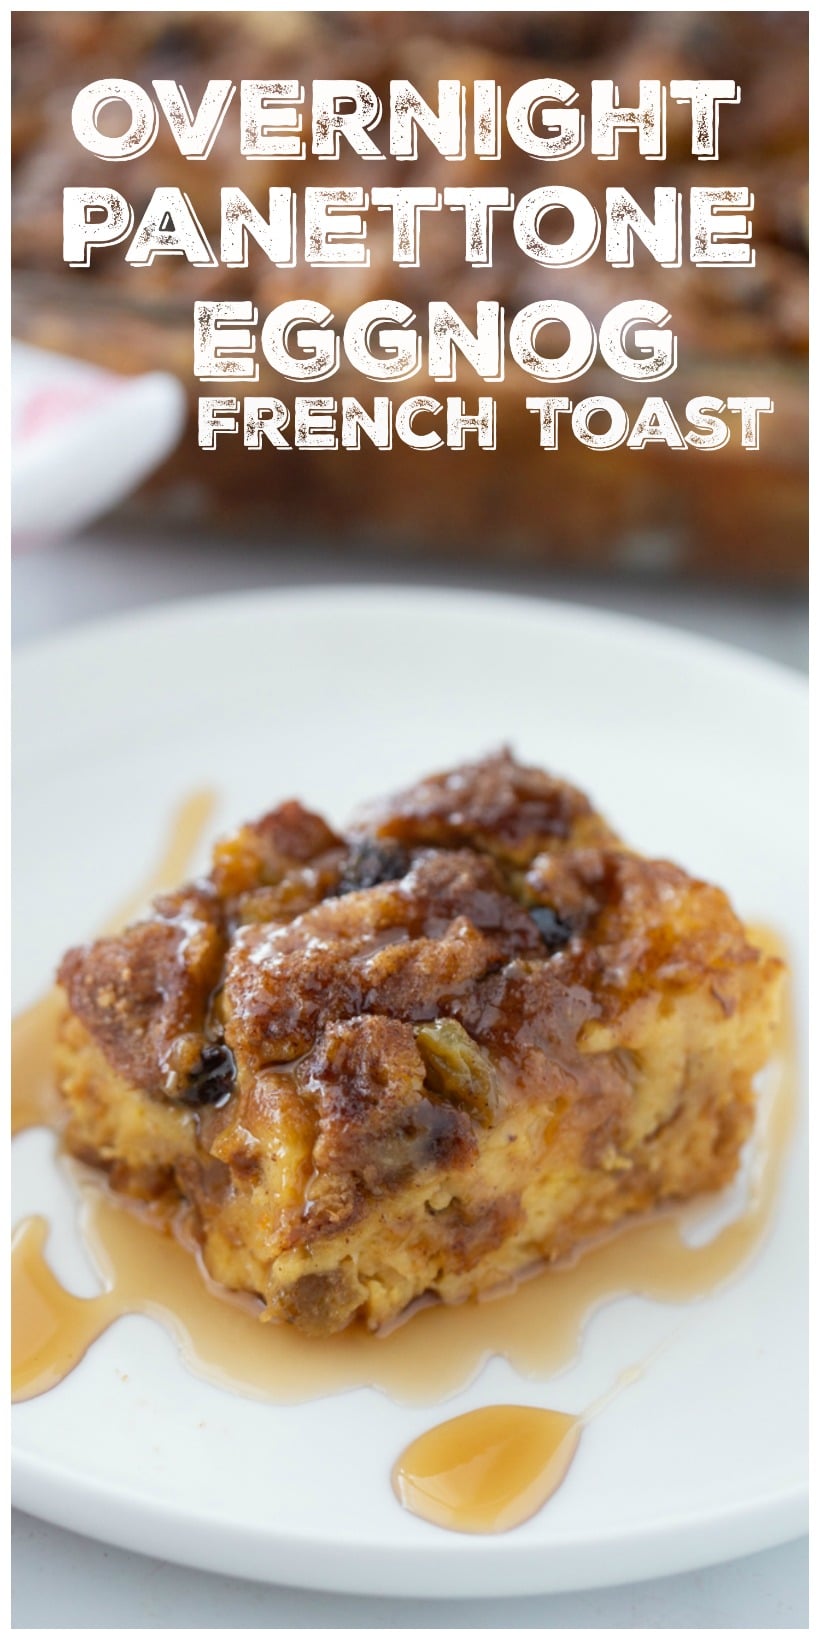 Panettone French toast casserole, a delicious holiday breakfast that can be put together the evening before. Simply wake up in the morning and place this cinnamon-scented, bread pudding-like meal in the oven to enjoy at leisure.  via @cmpollak1